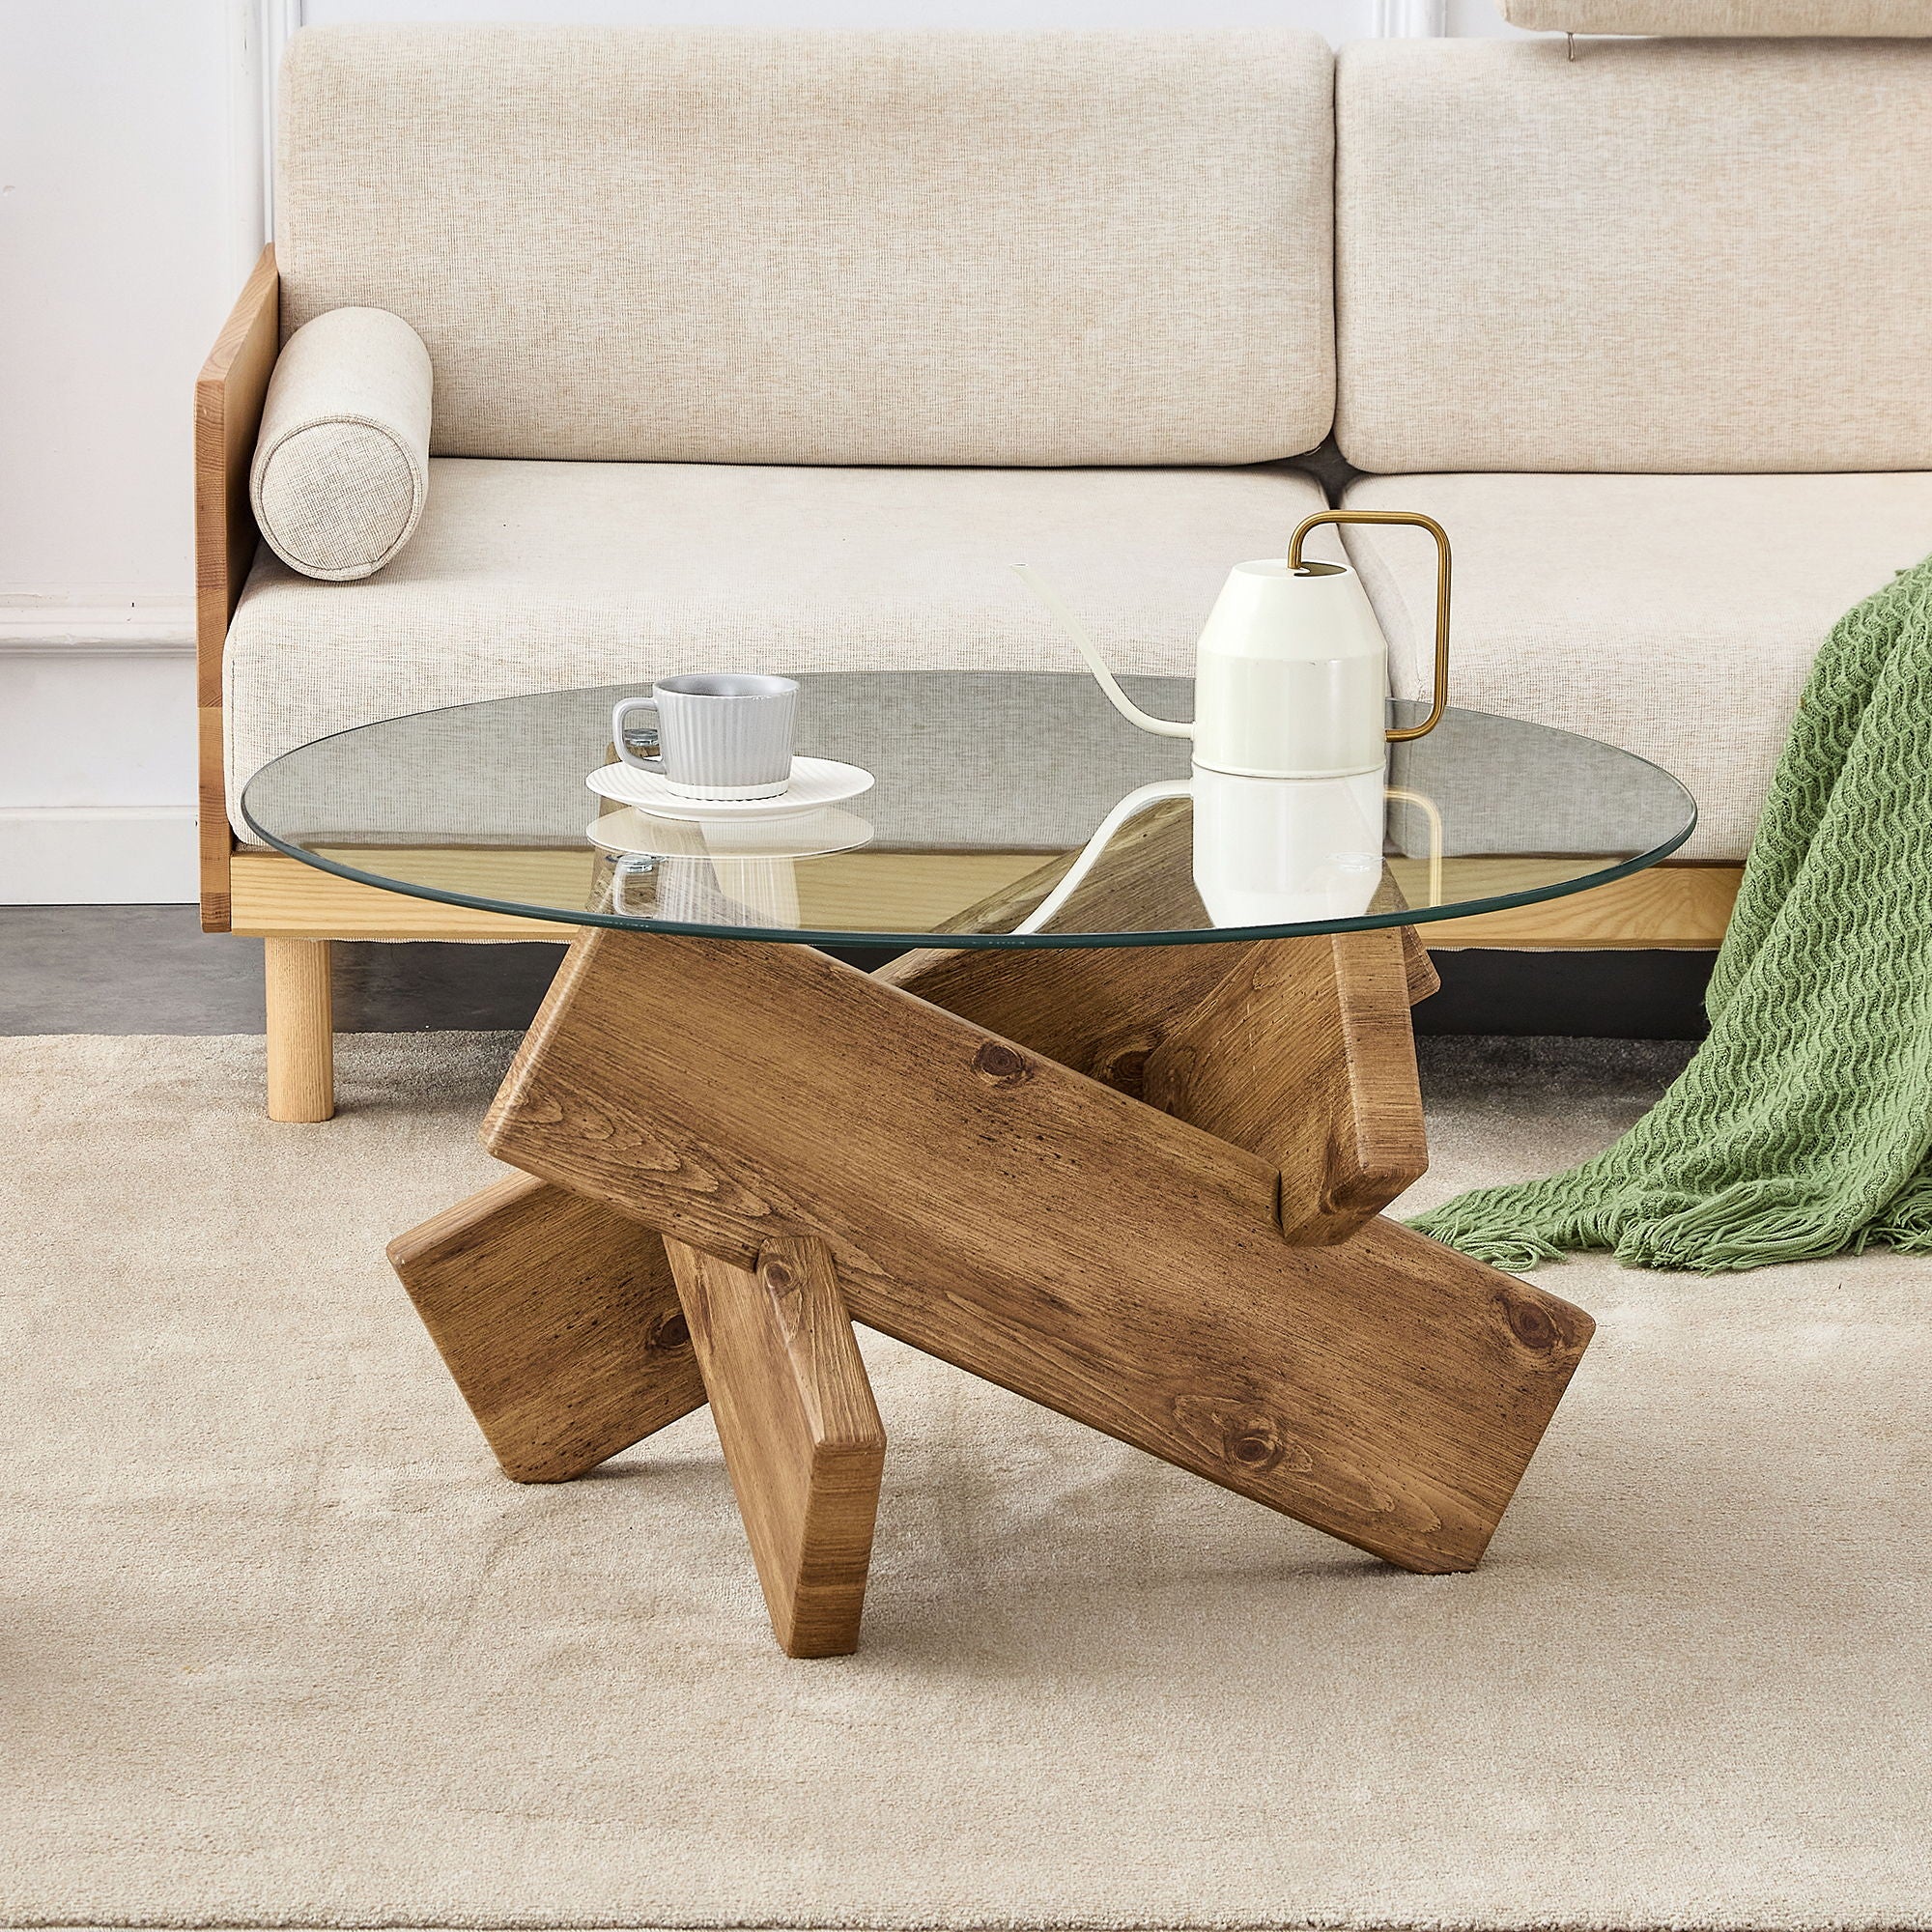 Circular Glass Coffee Table, Modern And Distinctive Design Tea Table Tempered Glass Countertop, Wood Colored MDF Table Legs Suitable For Living Rooms And Farmhouses